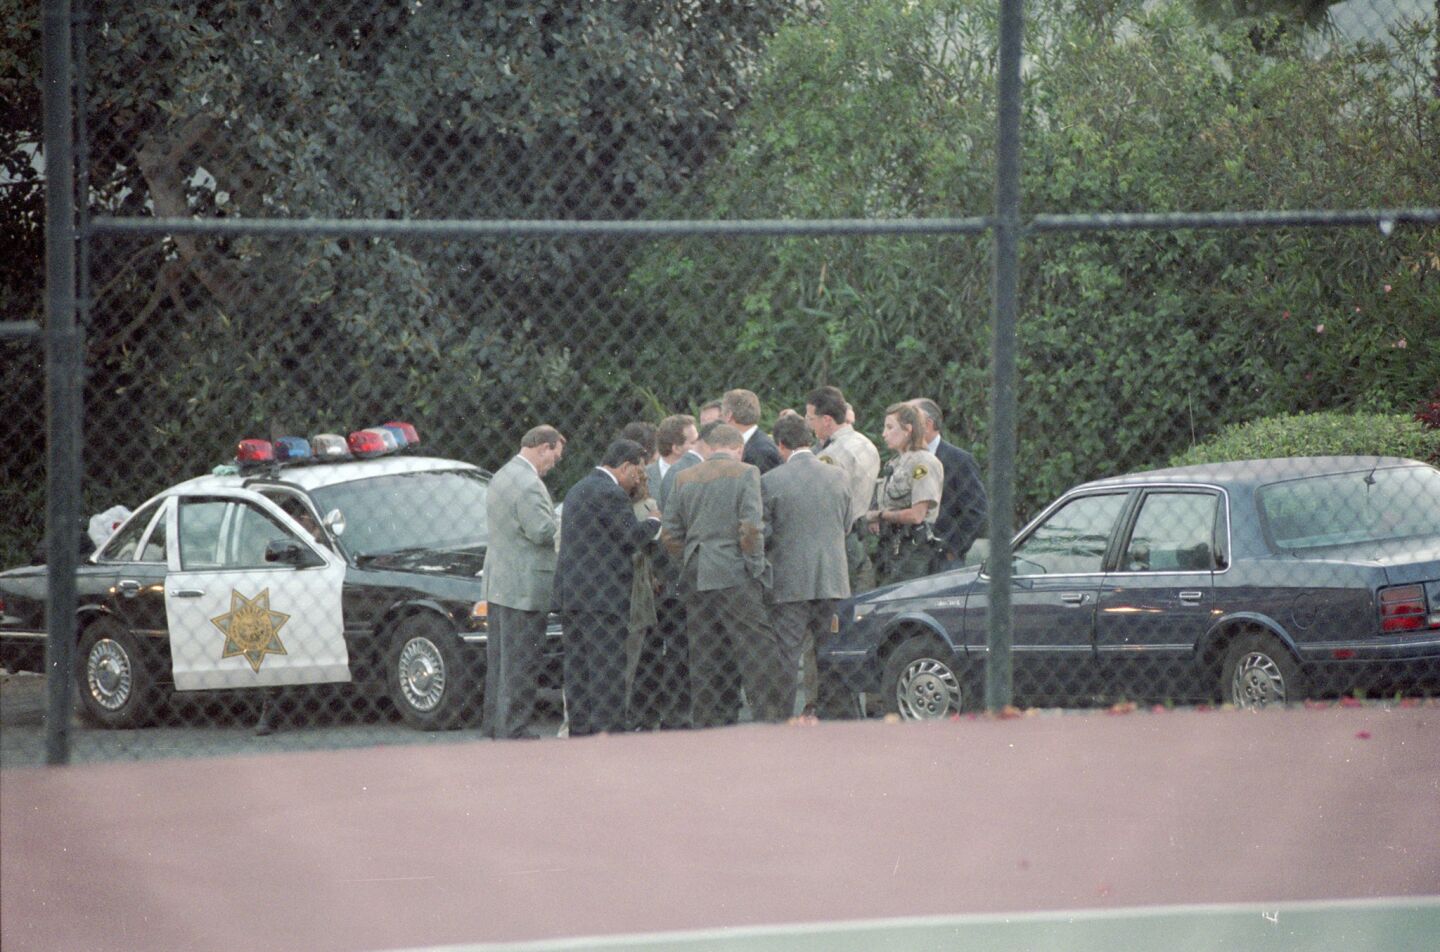 Sheriff's investigators waited outside a Rancho Santa Fe mansion for hours until a search warrant was issued to enter the home where the bodies of 39 Heaven's Gate members were found on March 26, 1997.